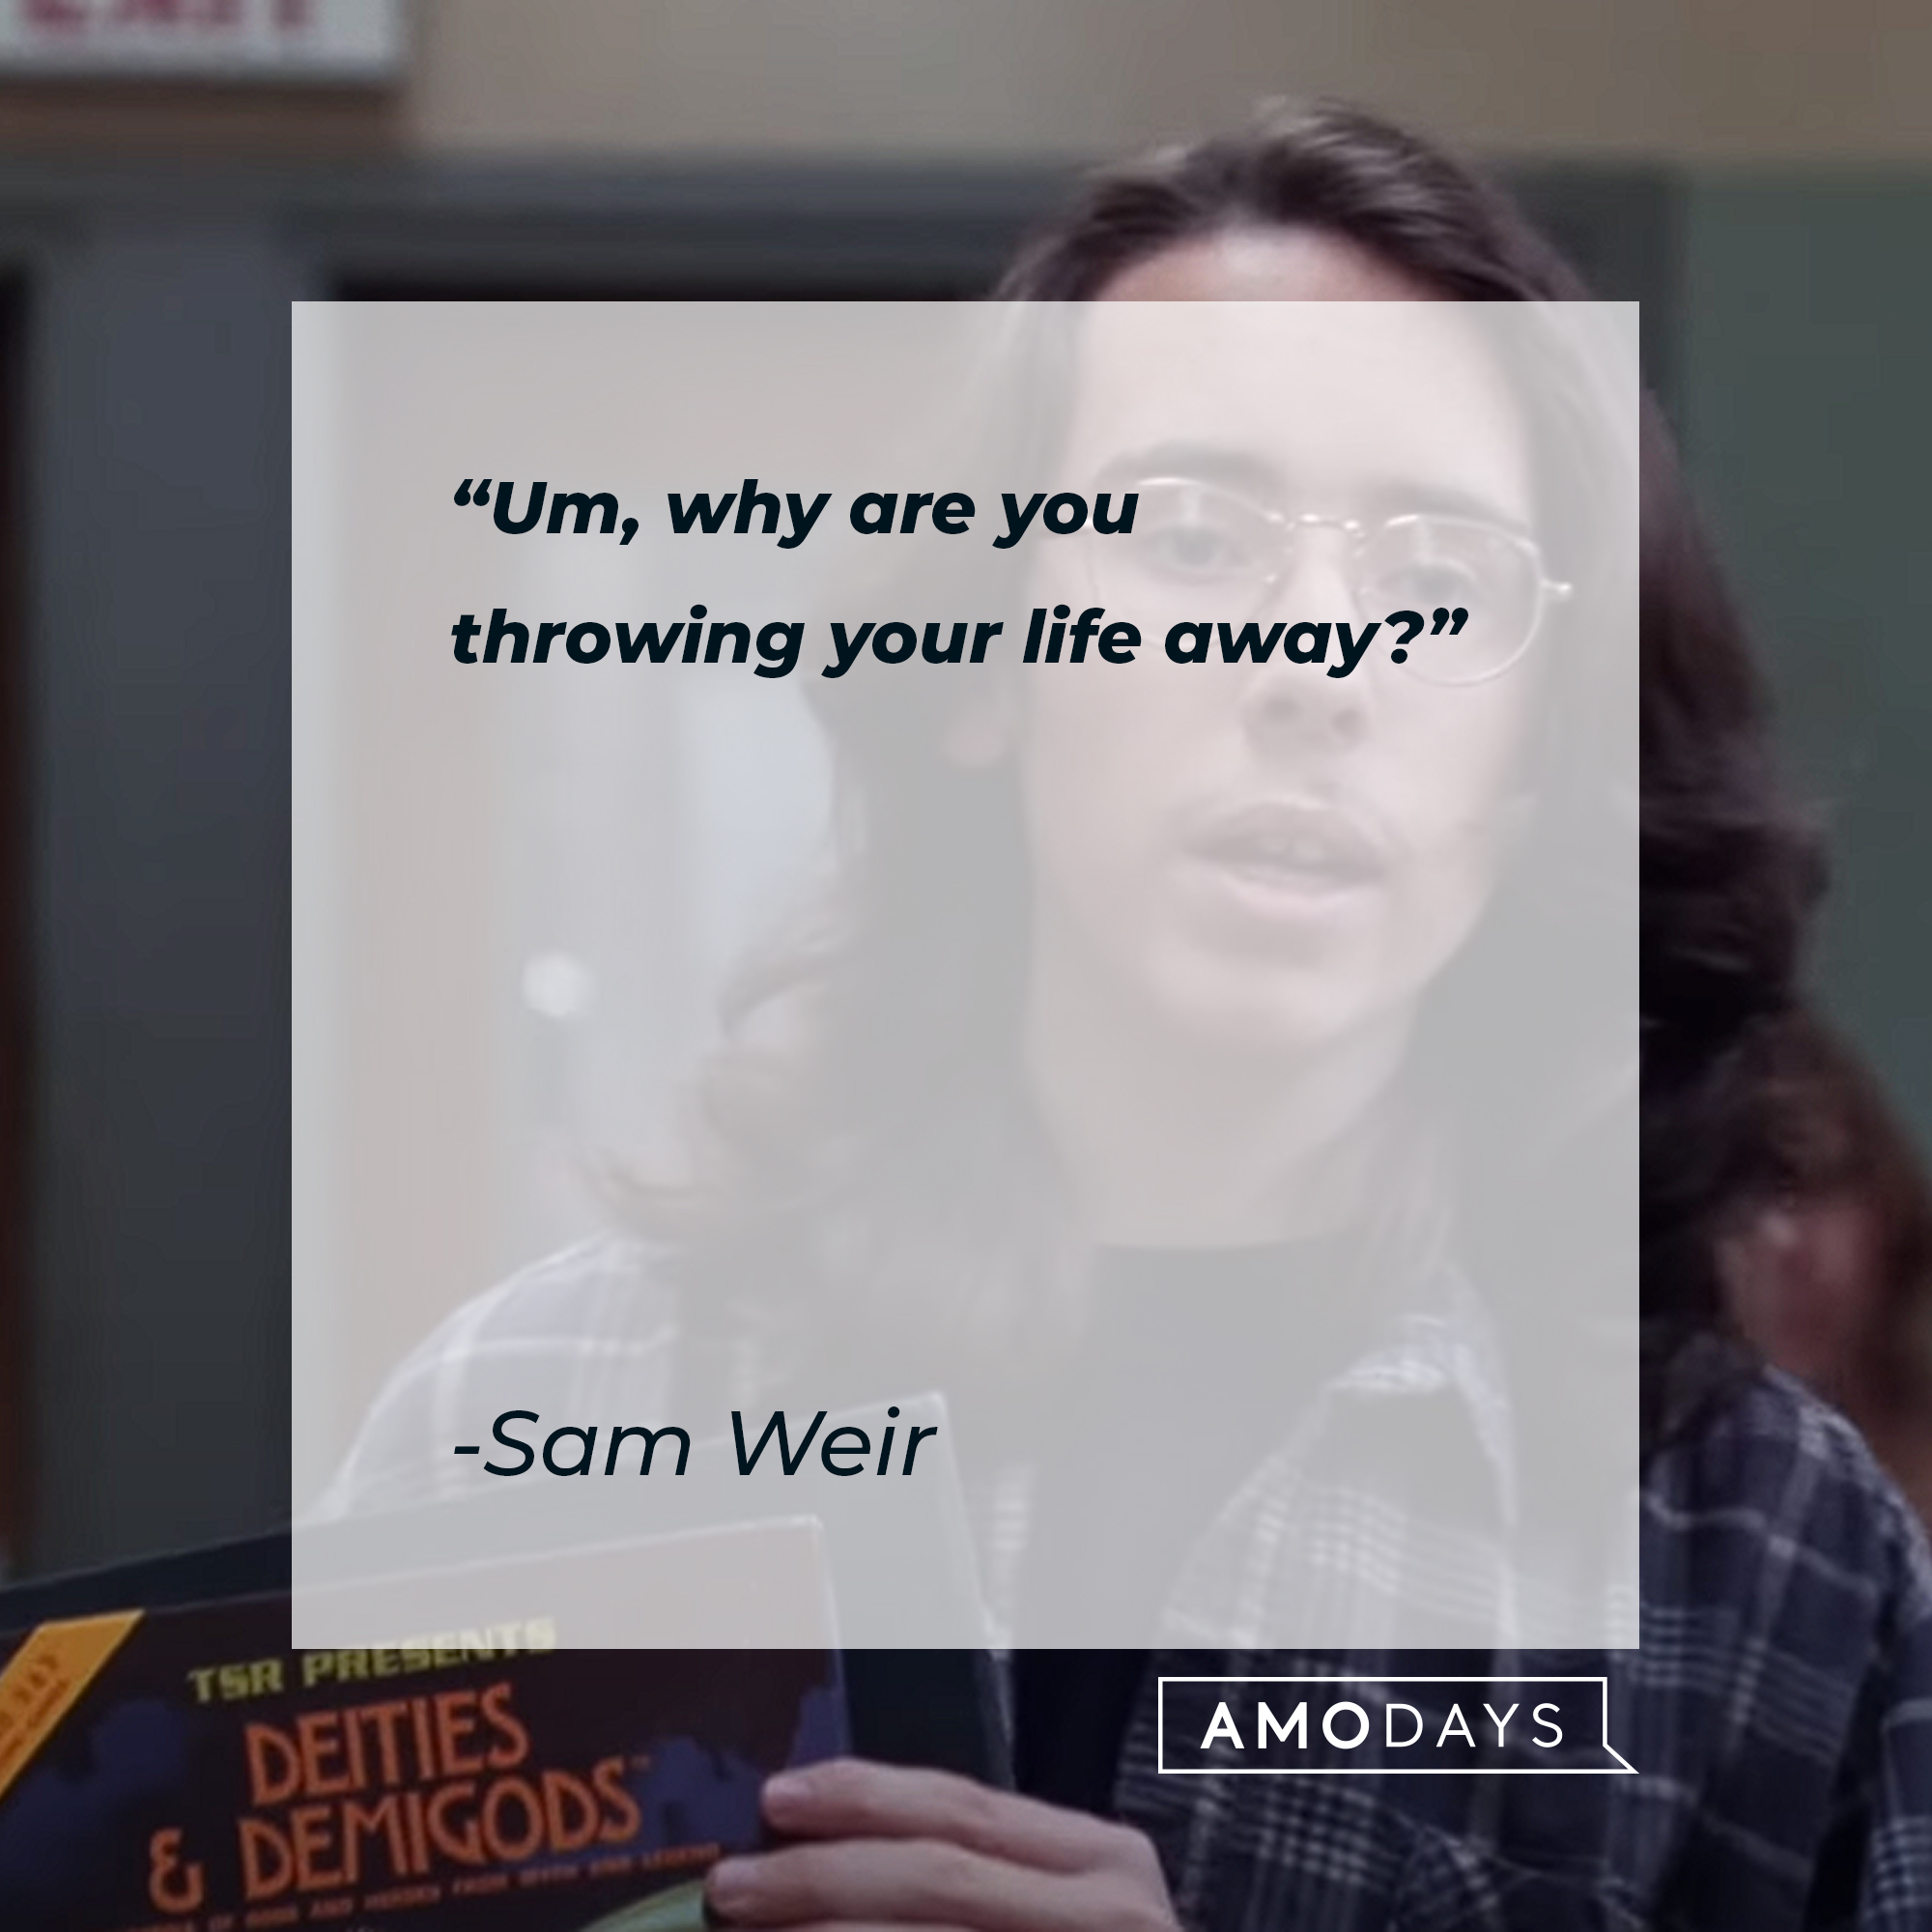 Sam Weir's quote: "Um, why are you throwing your life away?" | Source: Youtube.com/paramountmovies